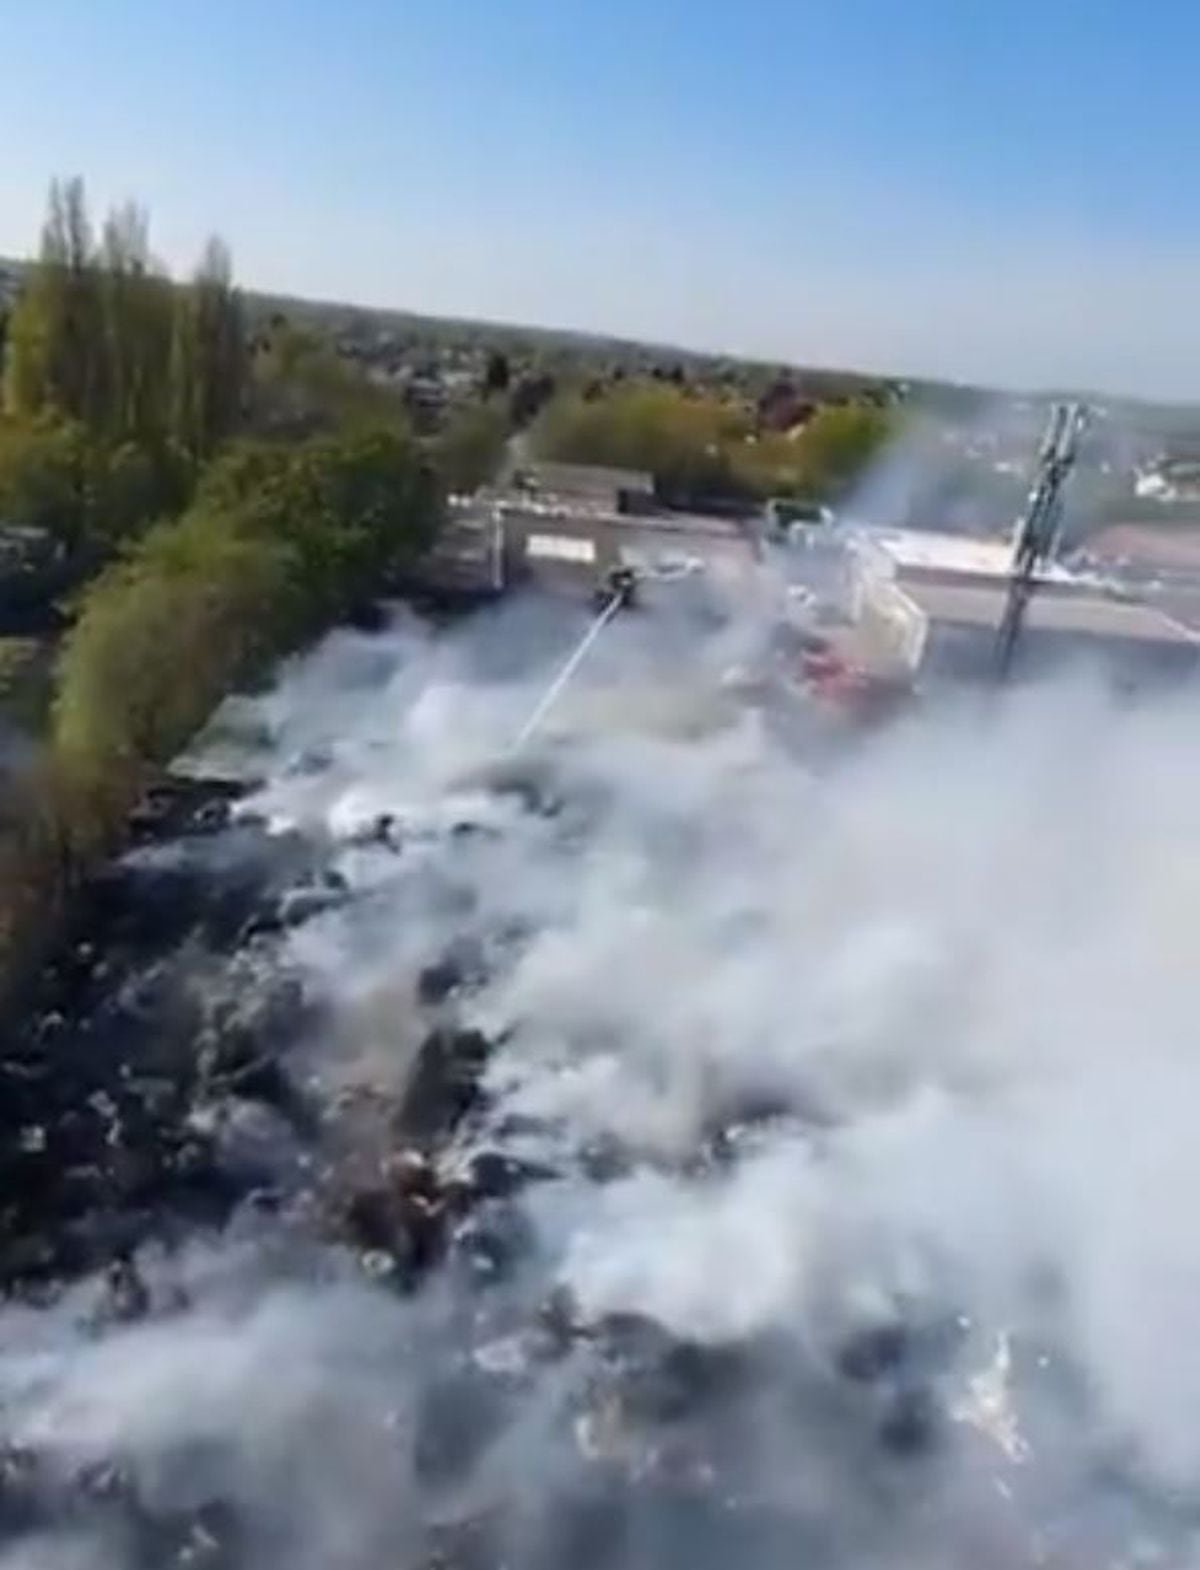 West Midlands Fire Service drone footage from above the blaze